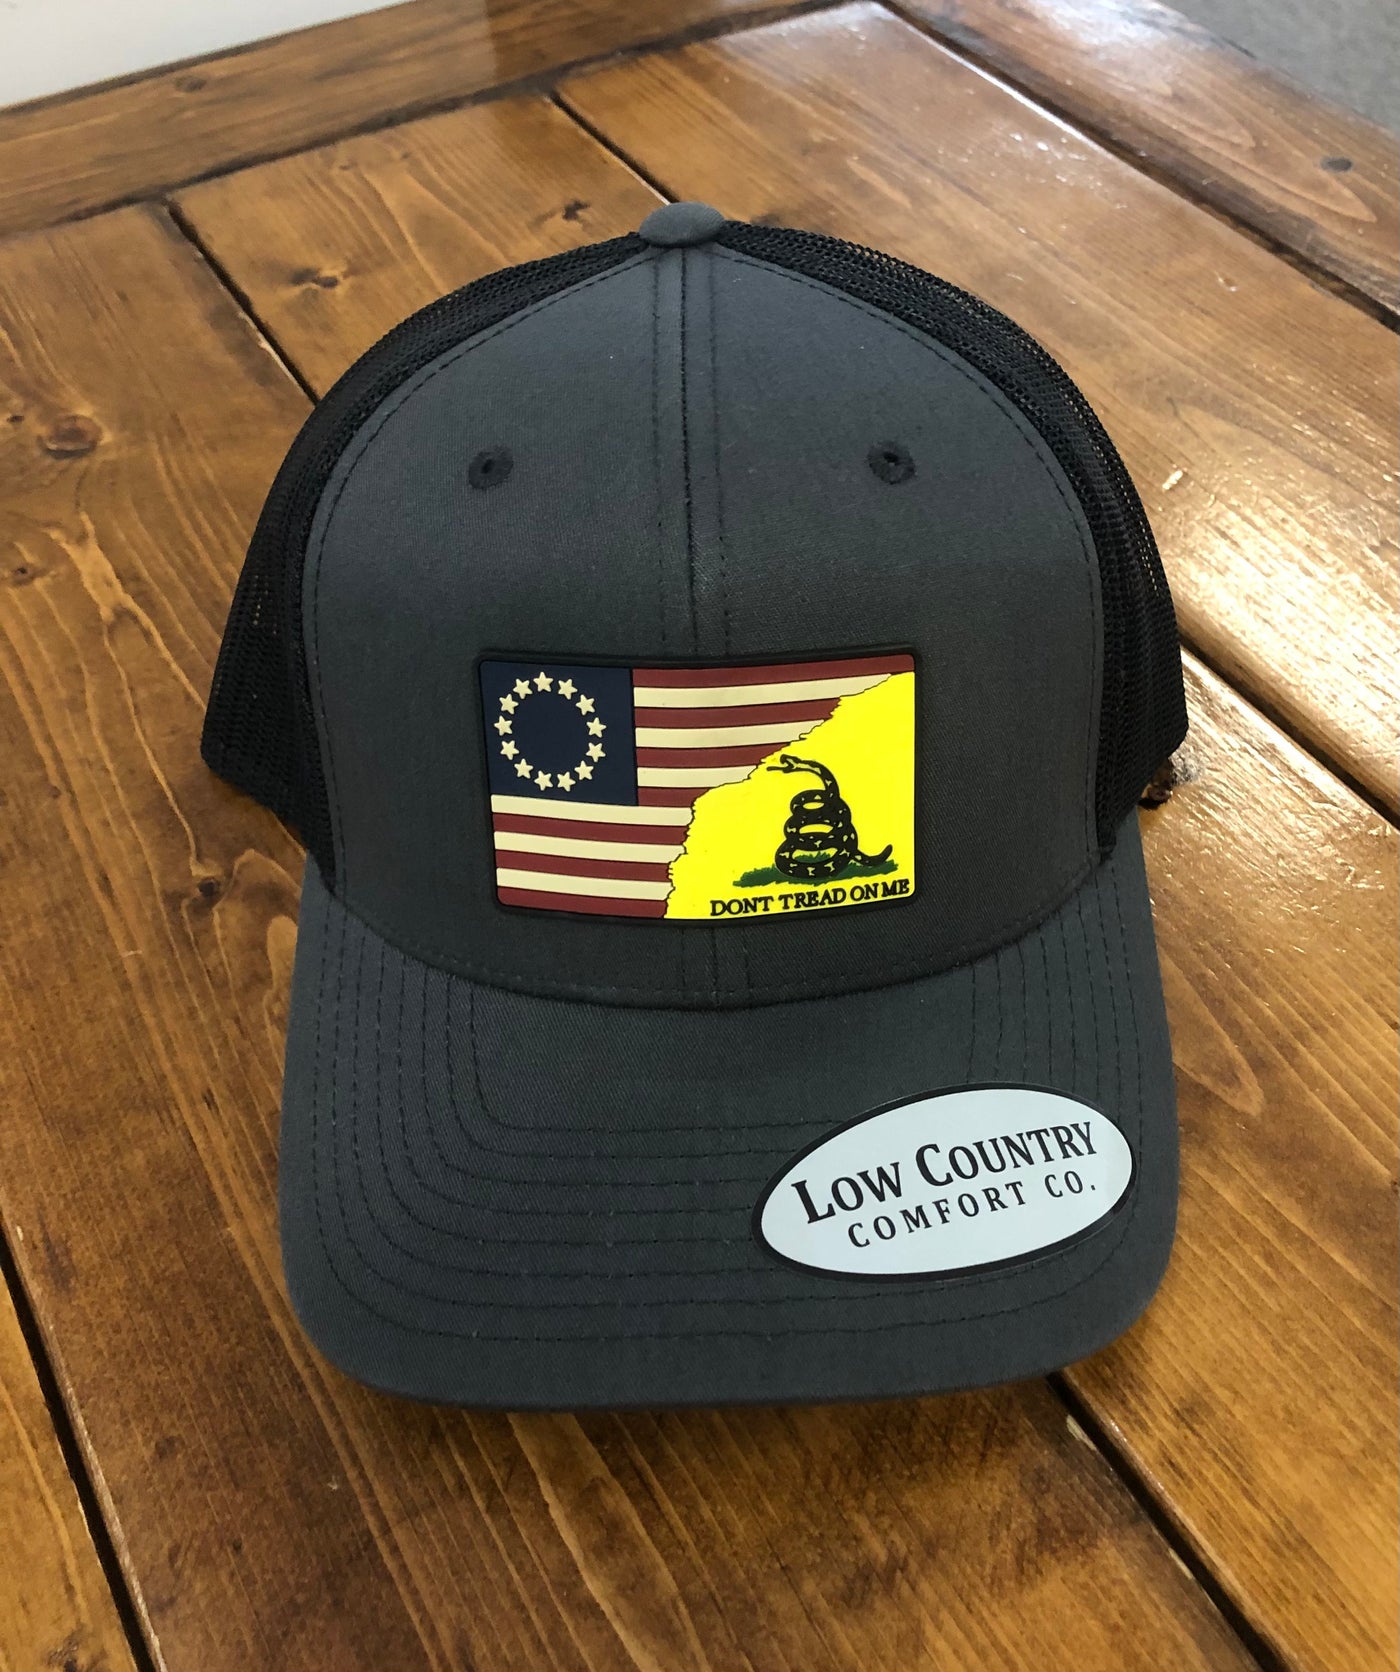 Low Country Comfort Co. Betsy Ross Don't Tread On Me Patch Charcoal/Black Hat